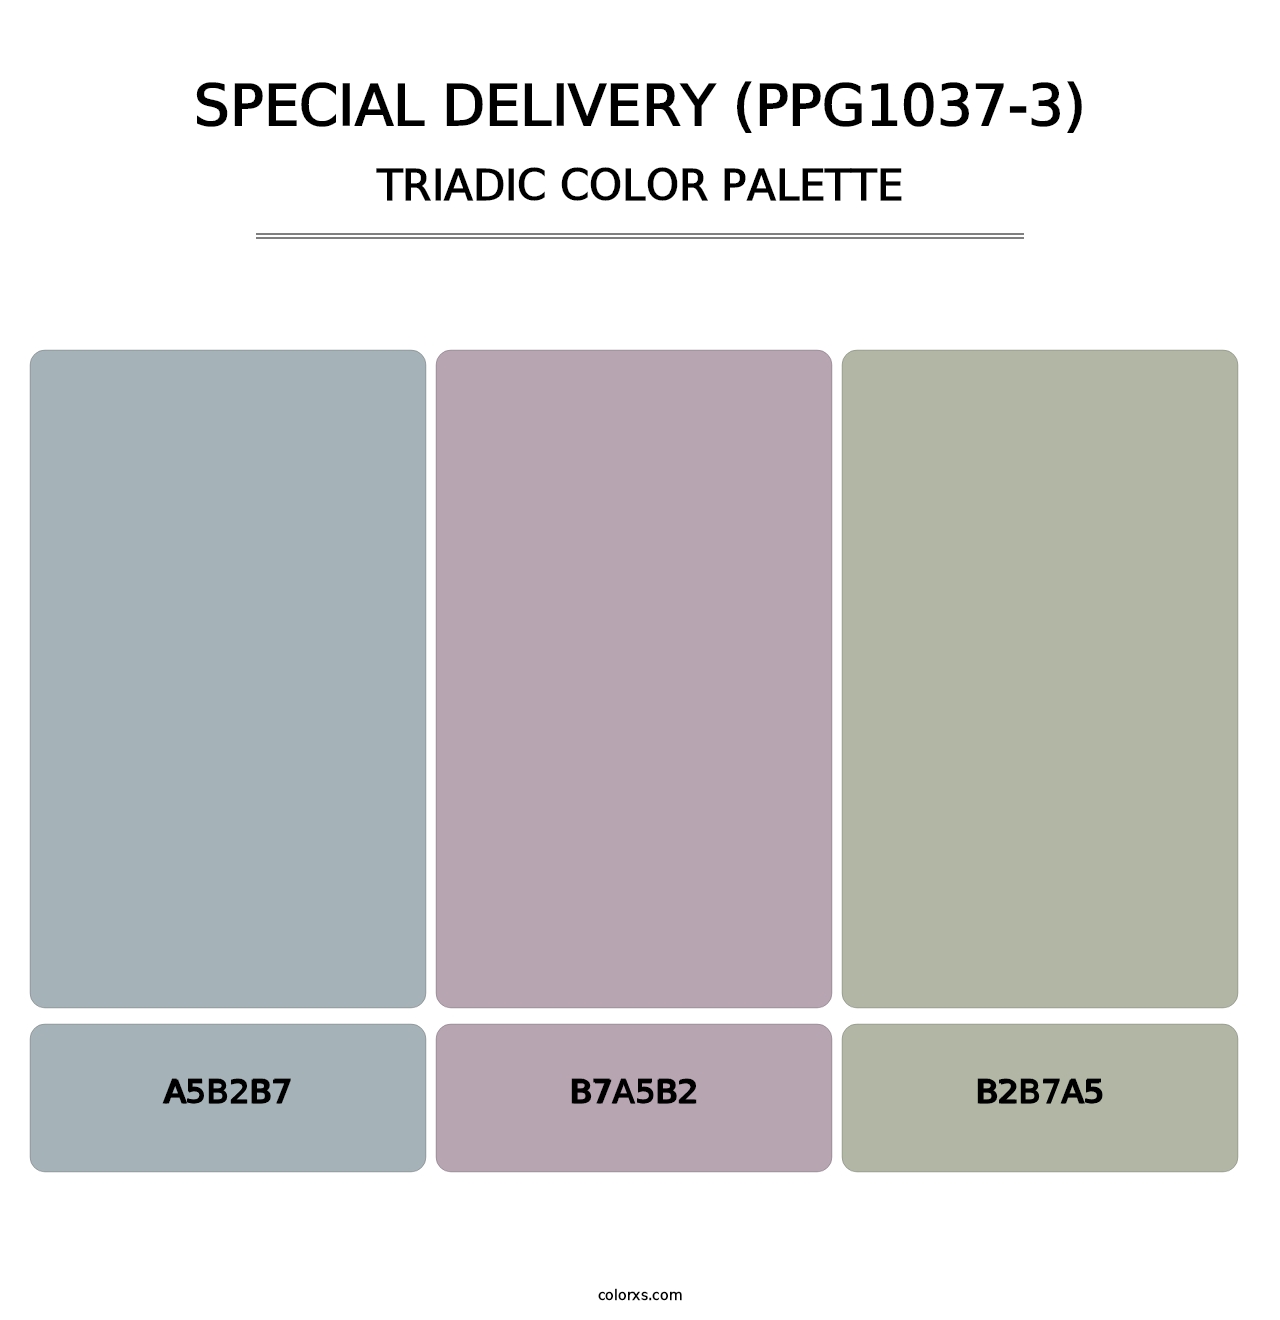 Special Delivery (PPG1037-3) - Triadic Color Palette